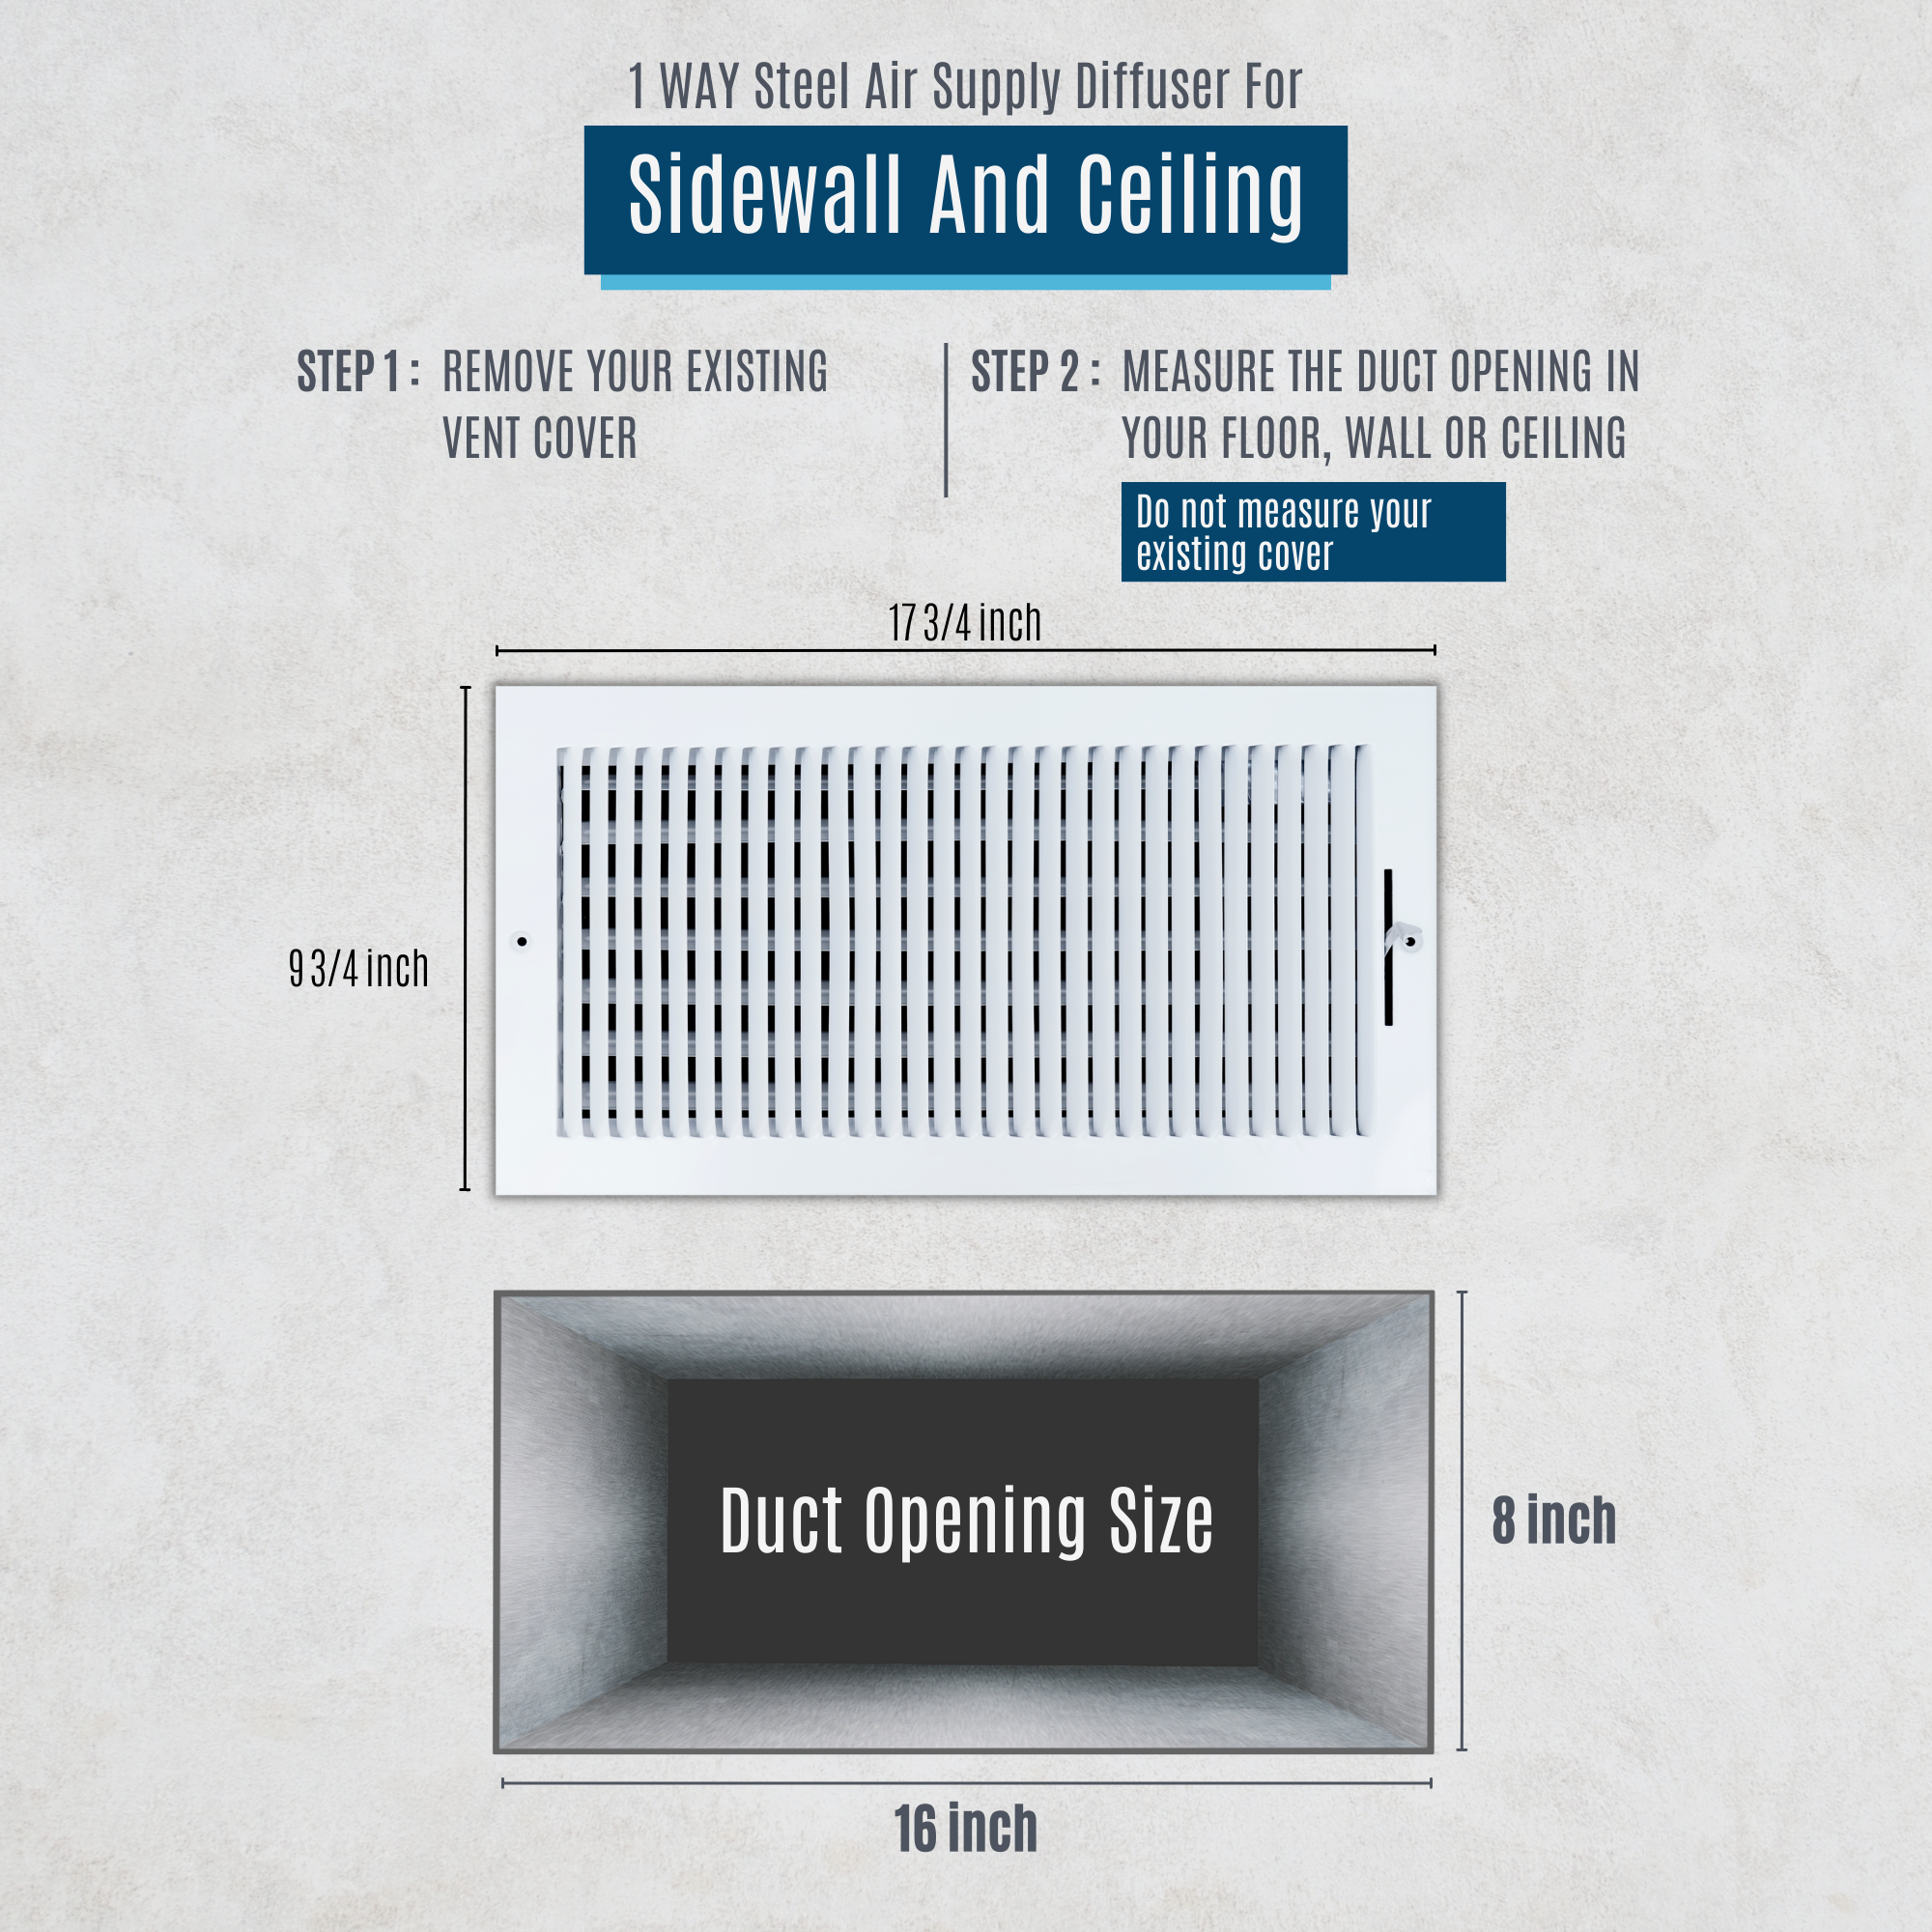 16 X 8 Duct Opening | 1 WAY Steel Air Supply Diffuser for Sidewall and Ceiling